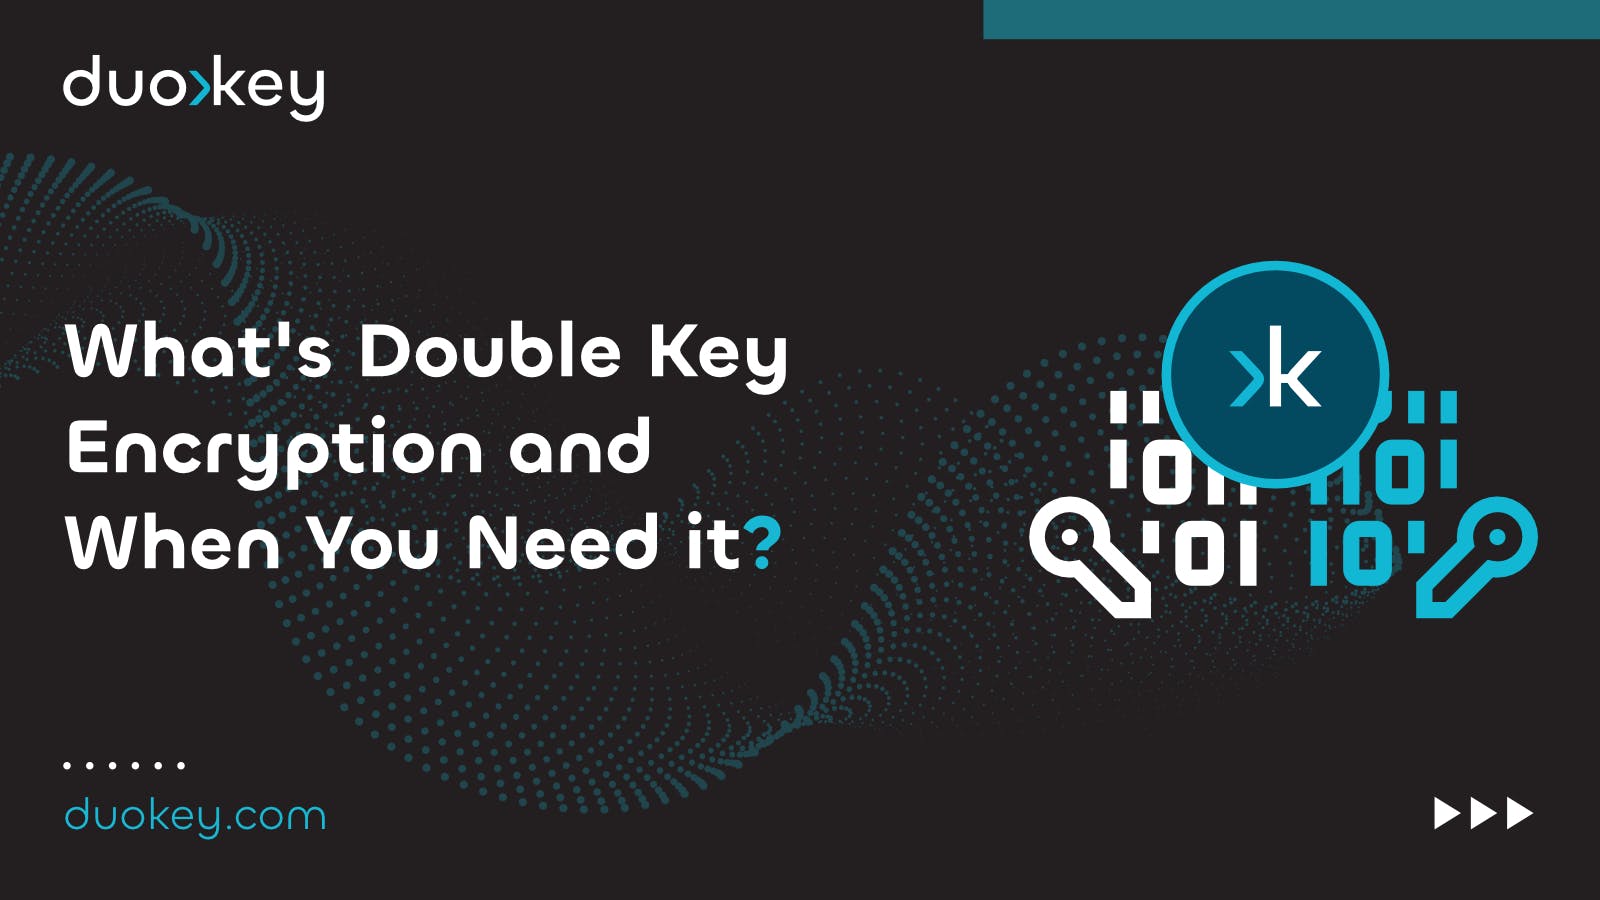 What’s Double Key Encryption (DKE) by DuoKey